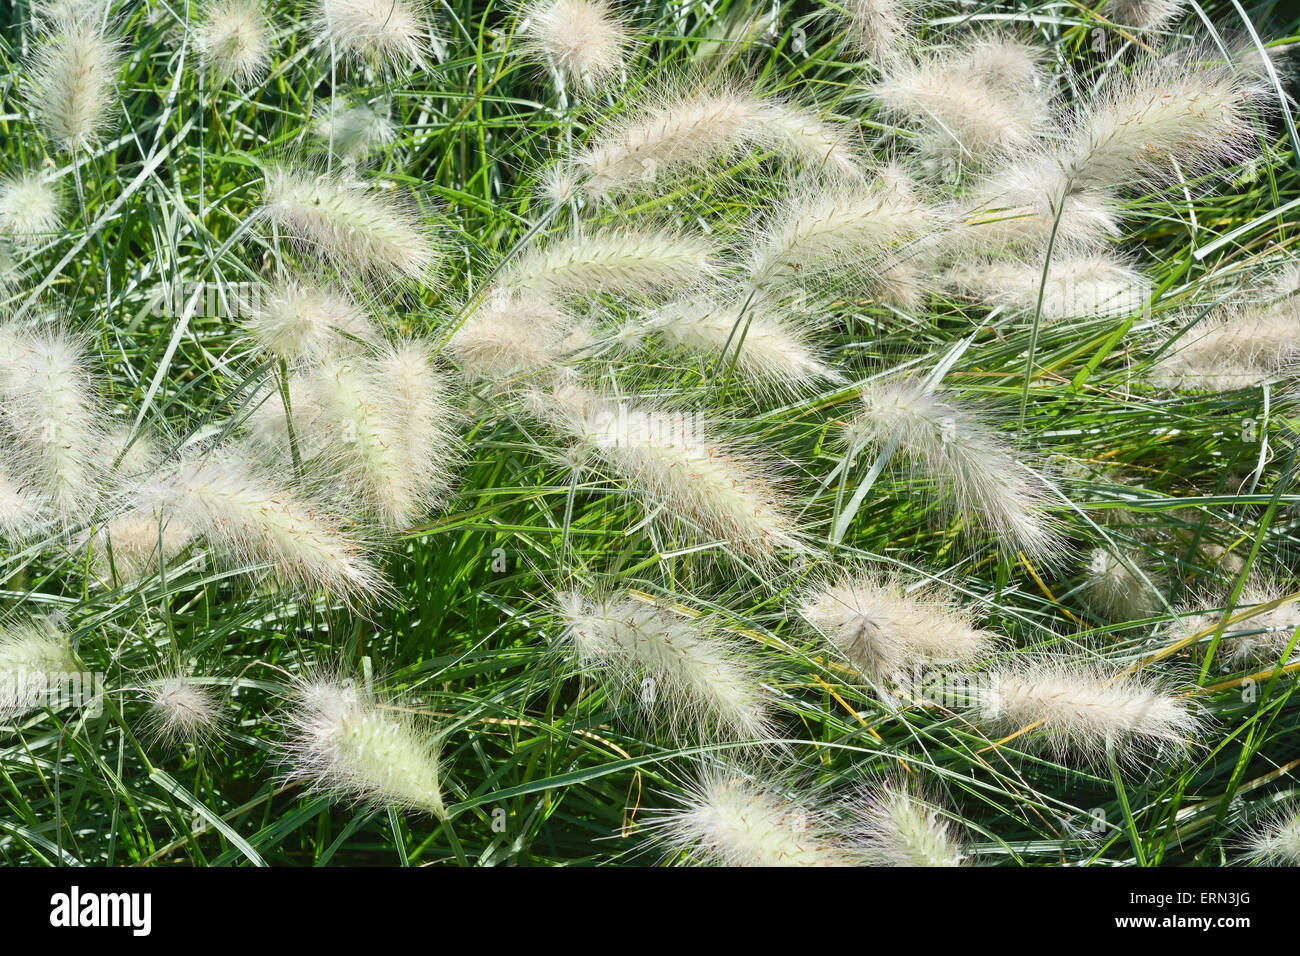 Garden with Close Up of Fountain Grass Stock Photo